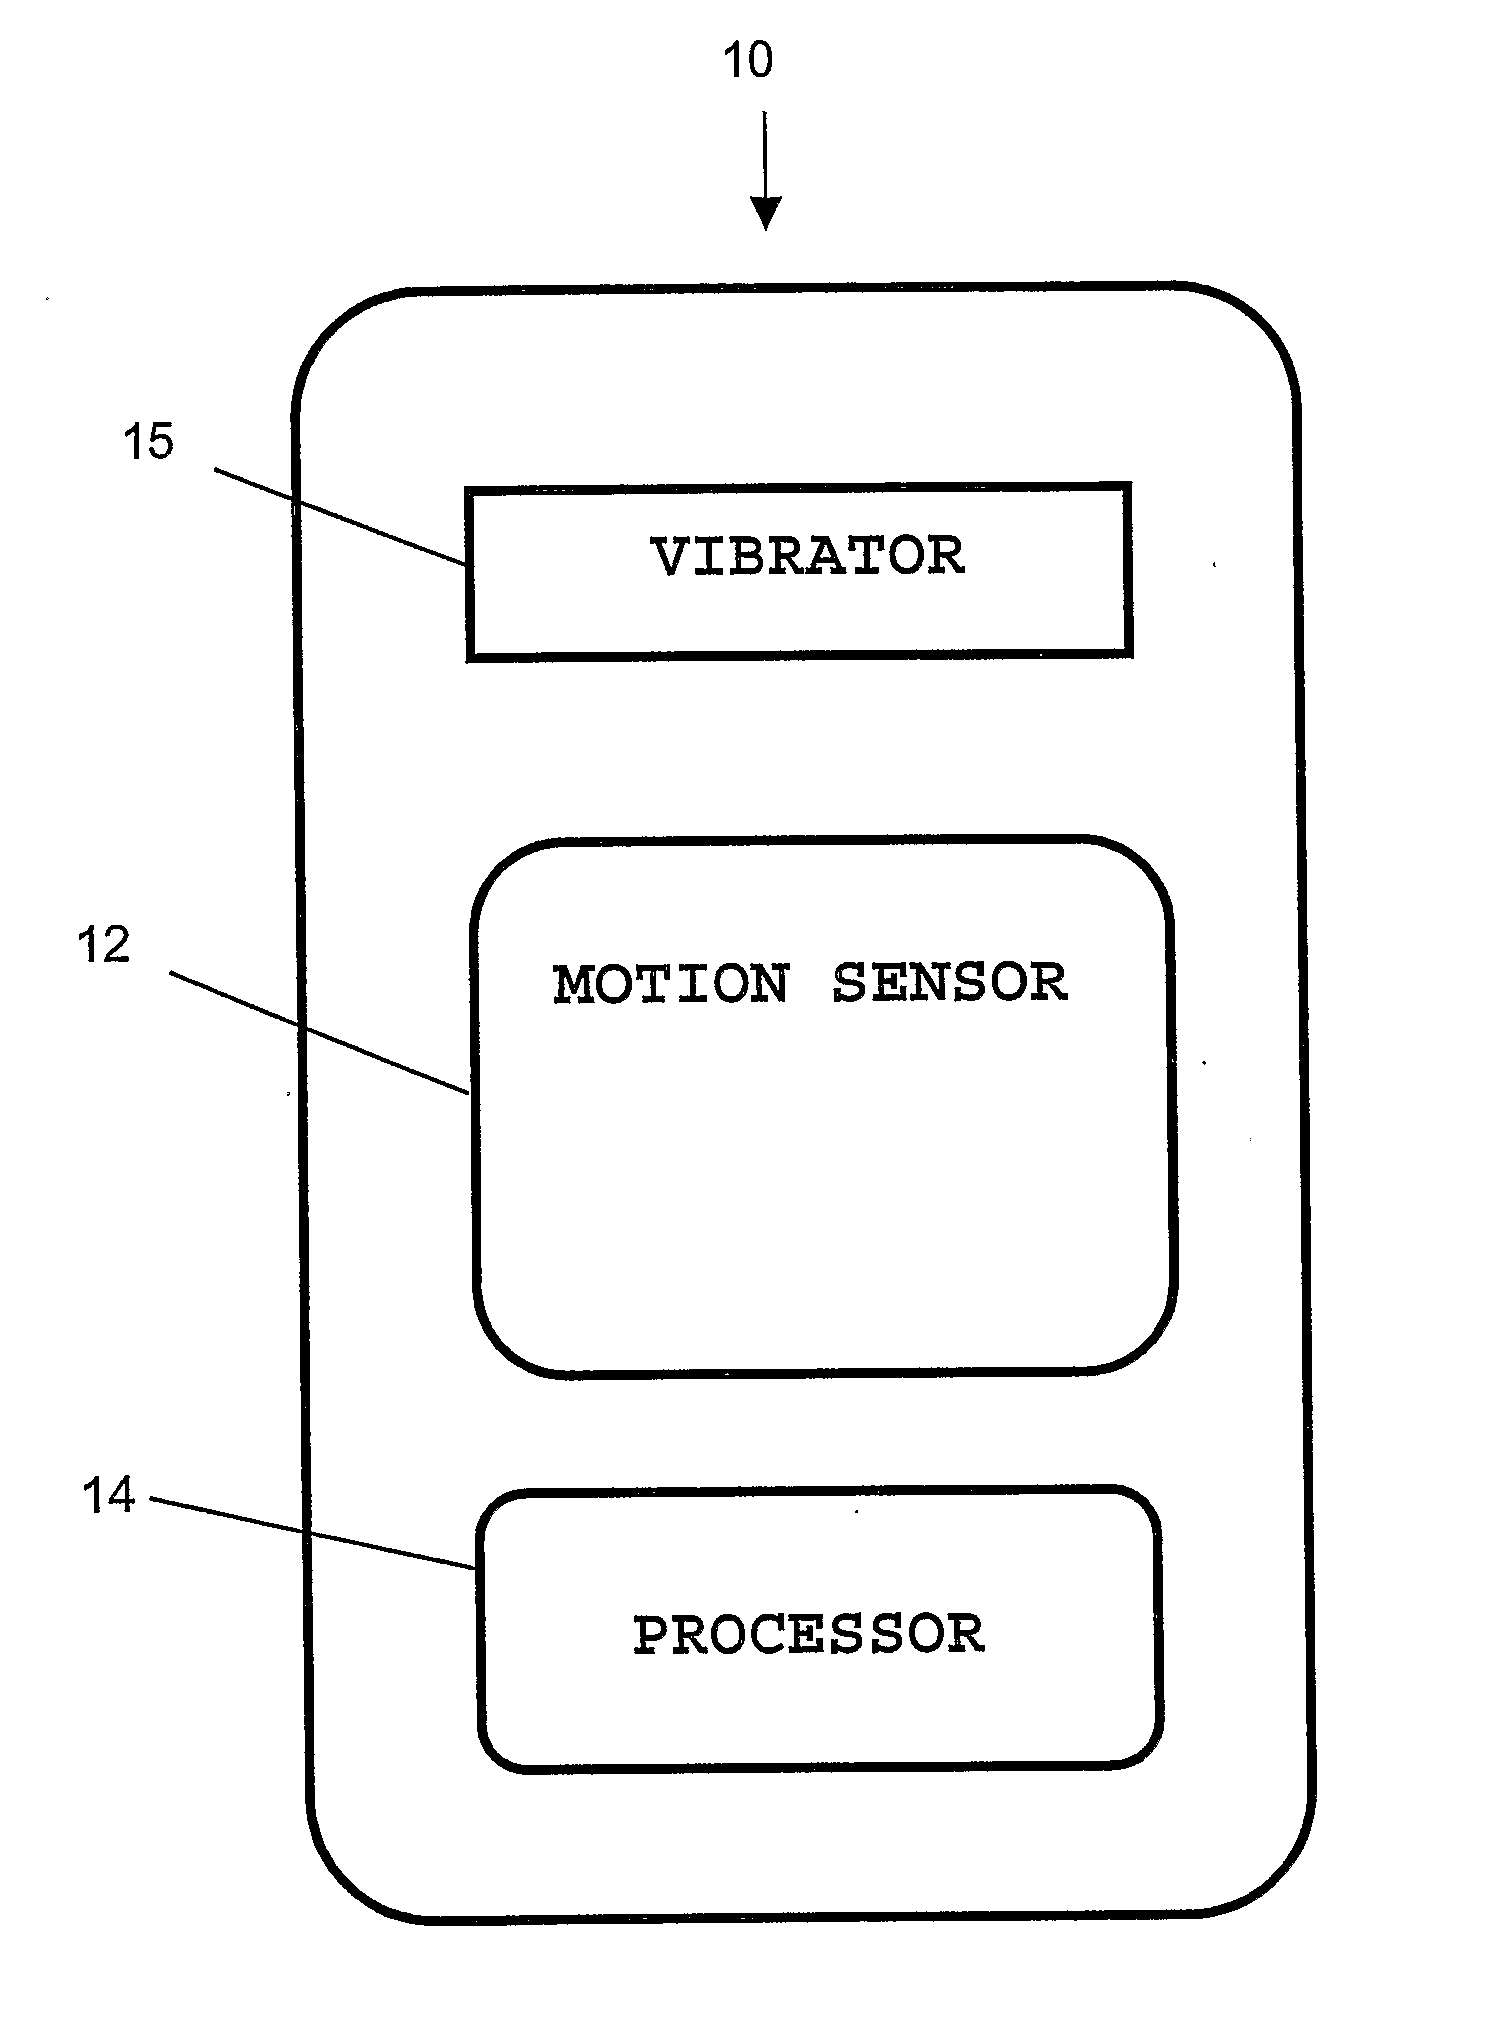 Method and apparatus for monitoring external physical parameters having an influence on the onset or progression of a medical condition